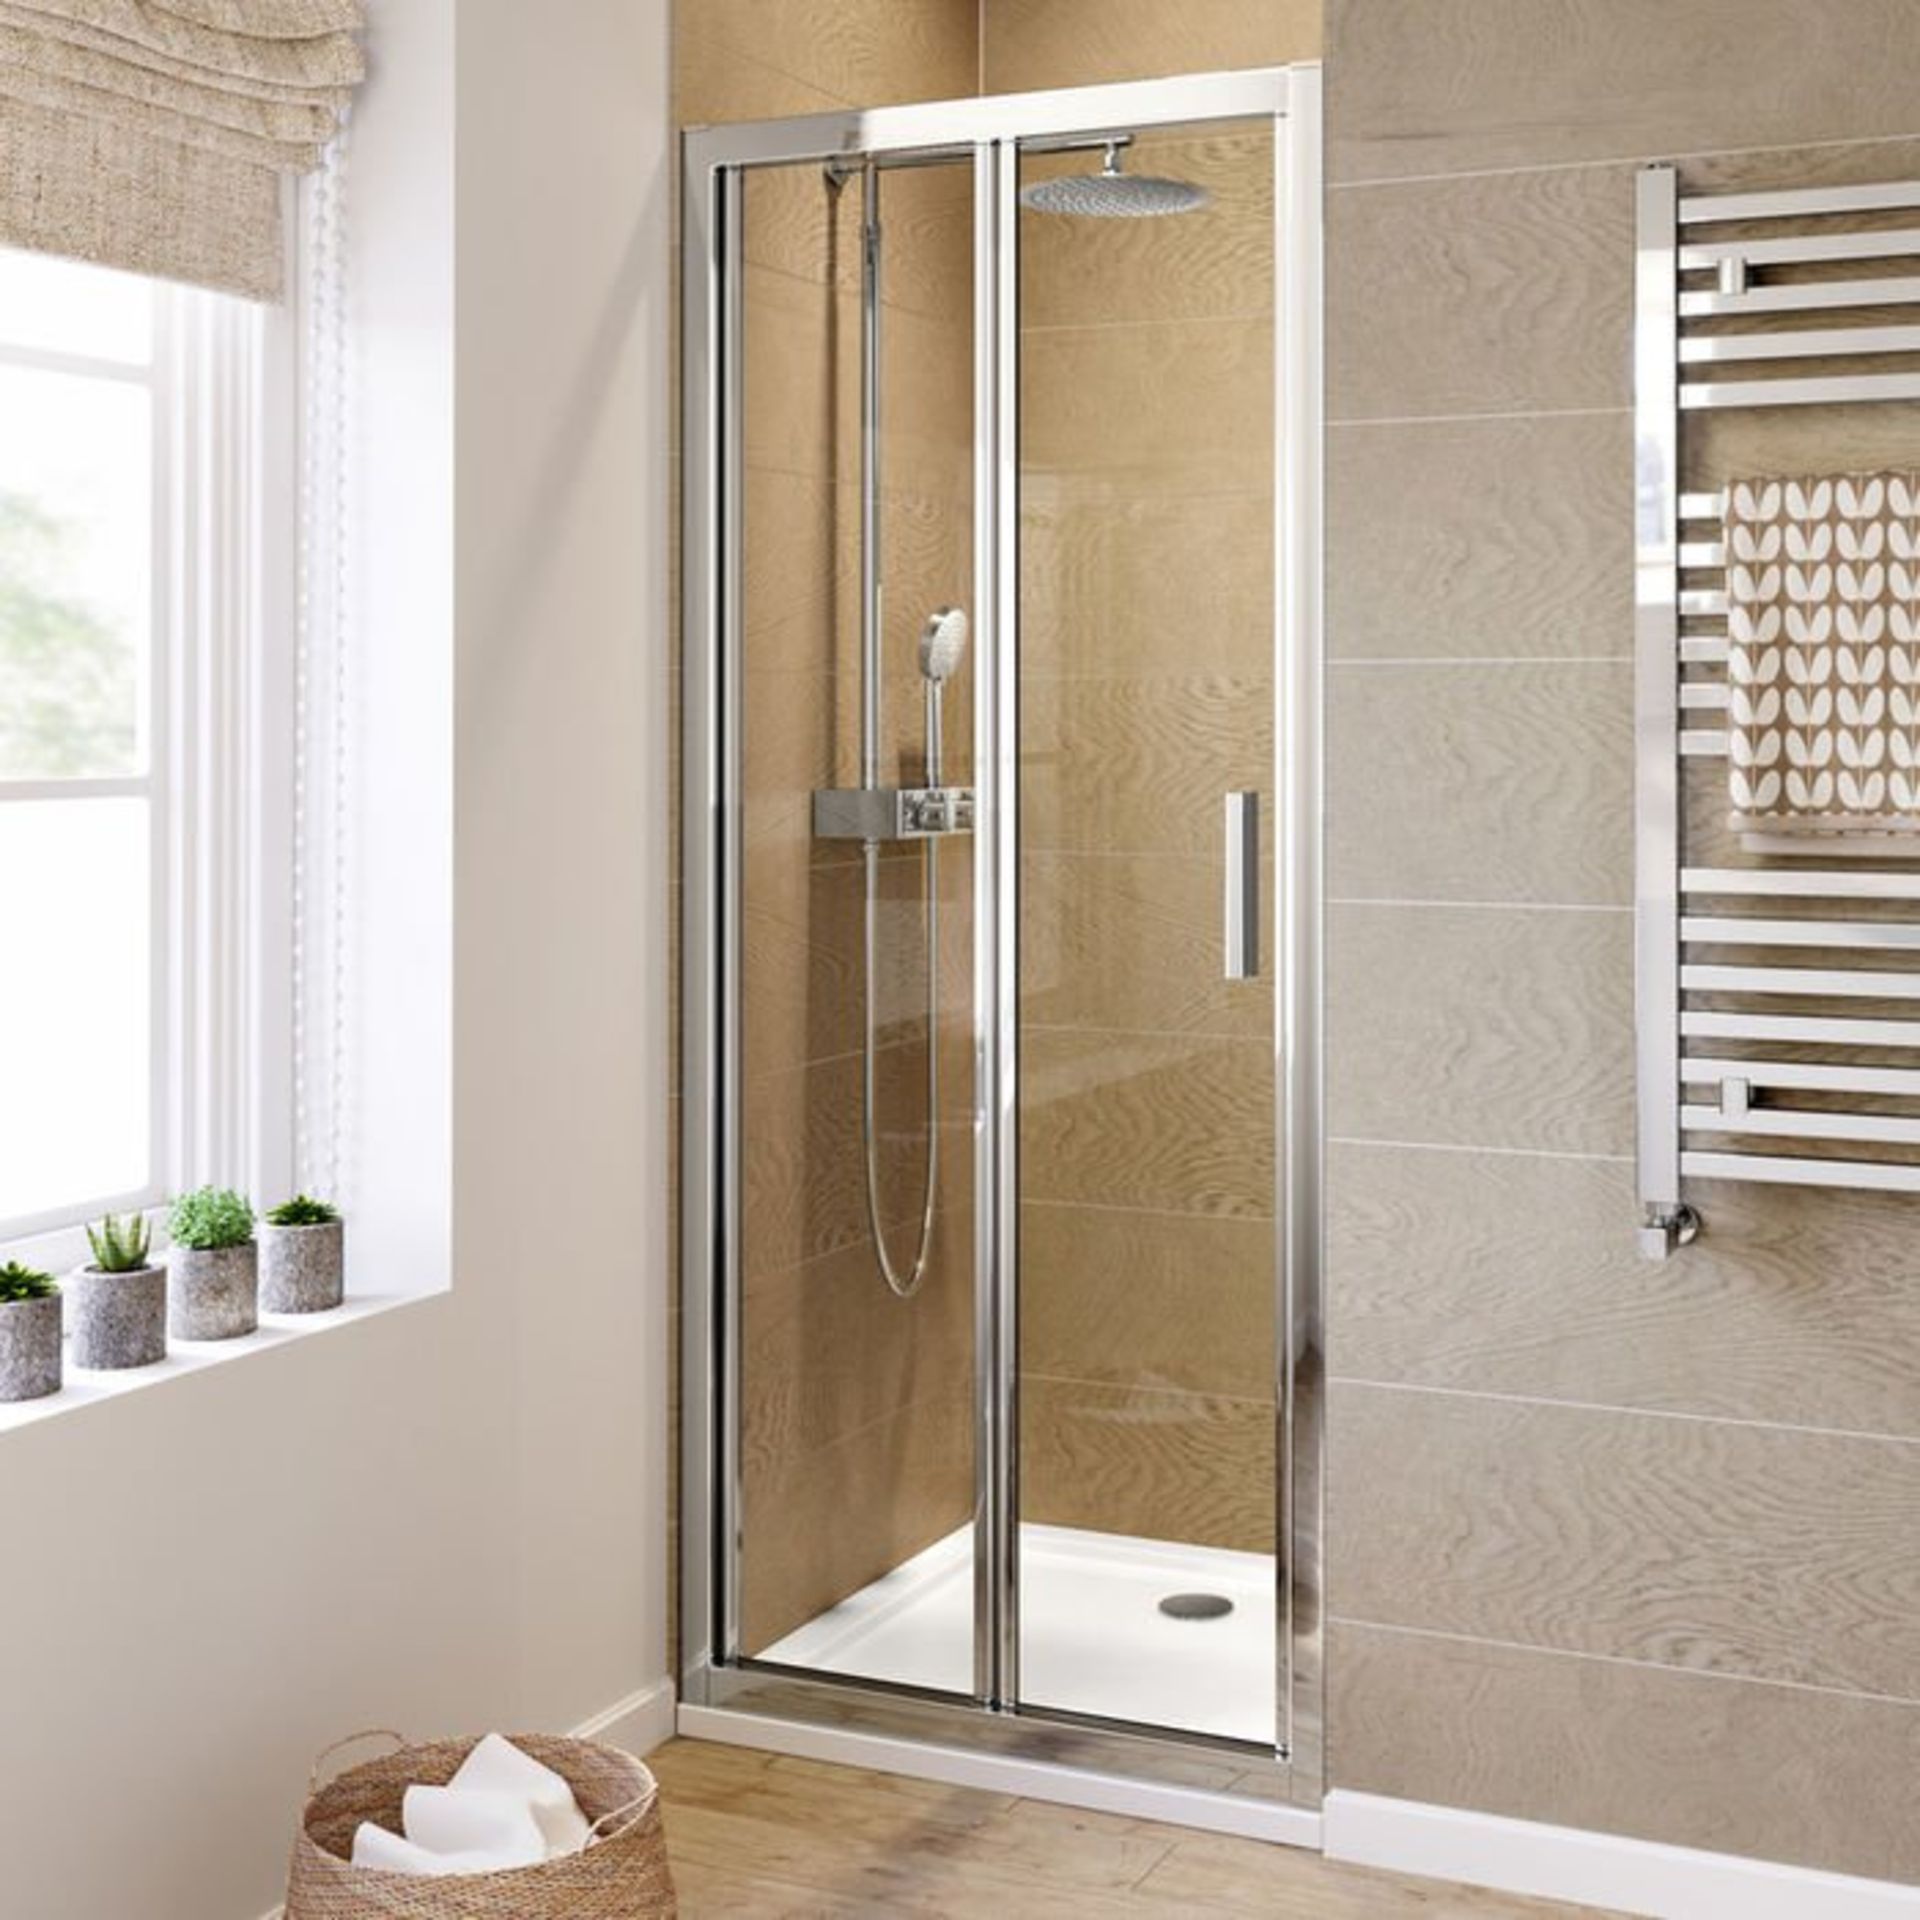 (H237) 1000mm - 6mm - Elements EasyClean Bifold Shower Door. RRP £299.99. 6mm Safety Glass - - Image 2 of 3